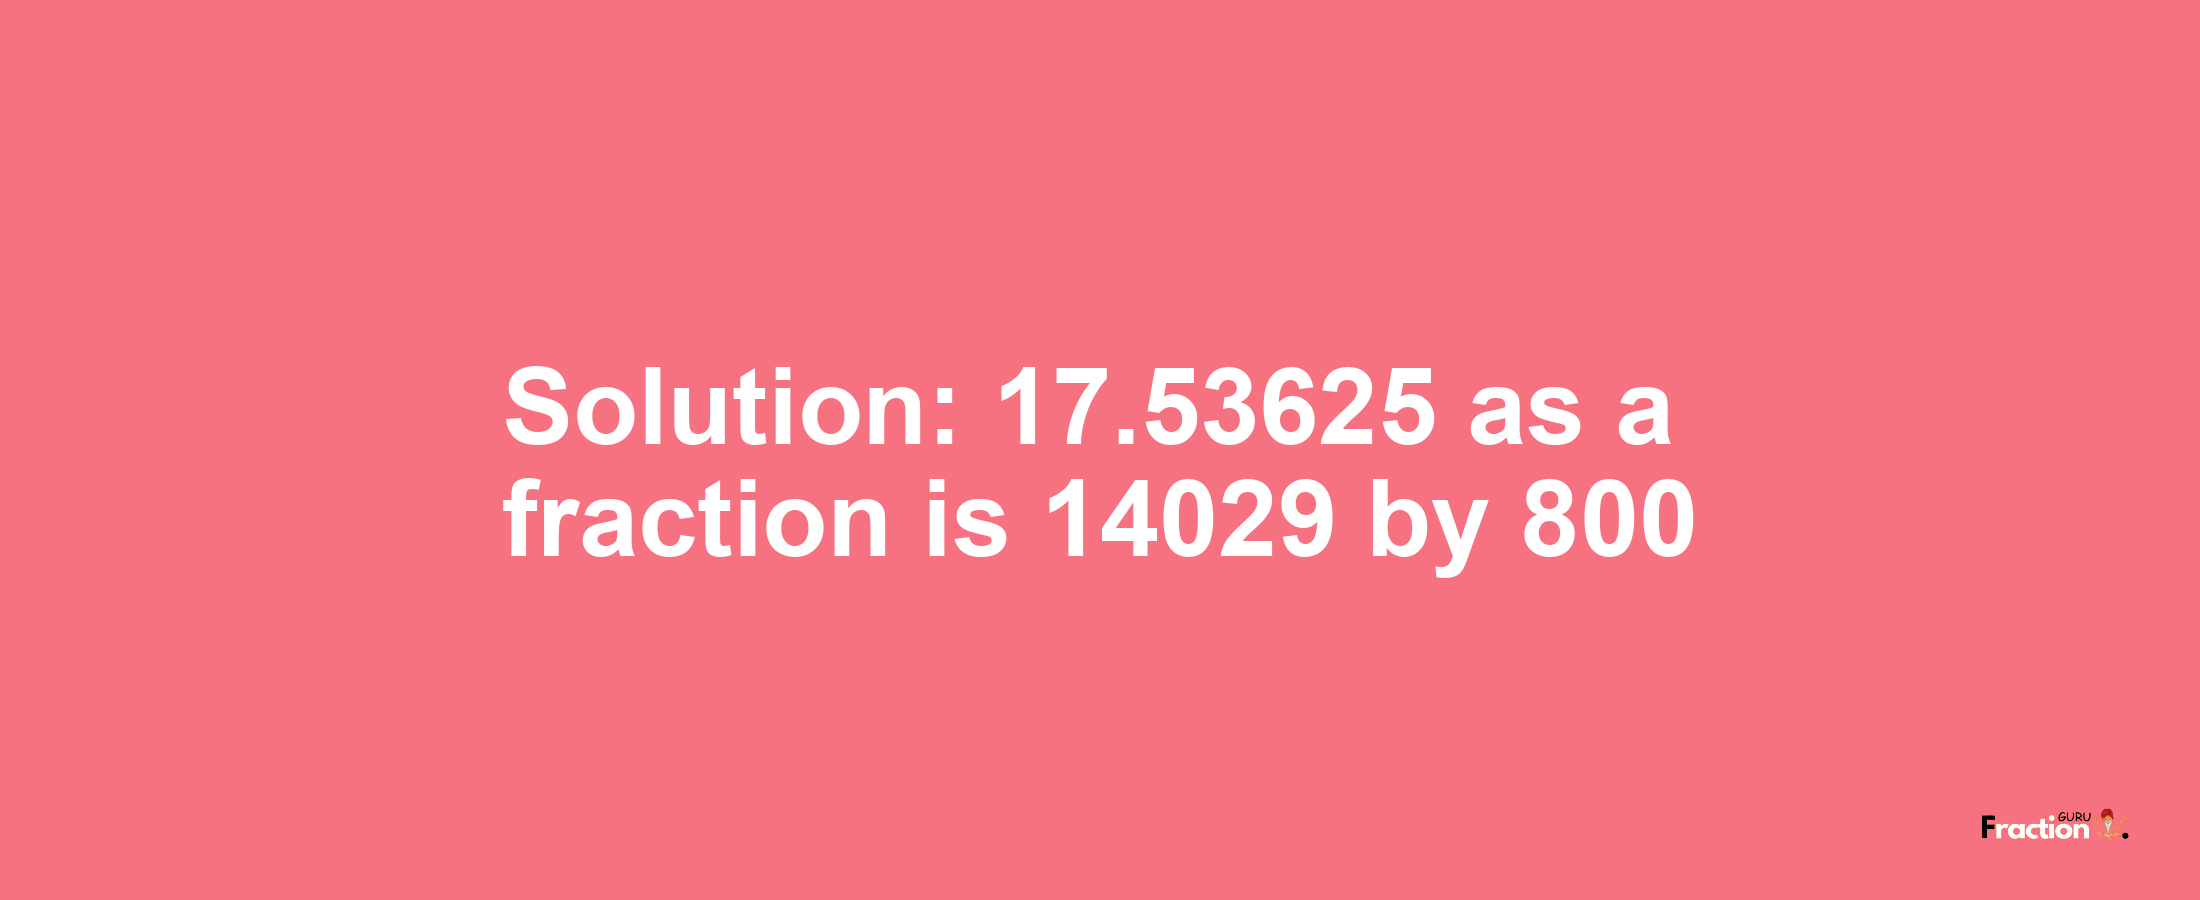 Solution:17.53625 as a fraction is 14029/800